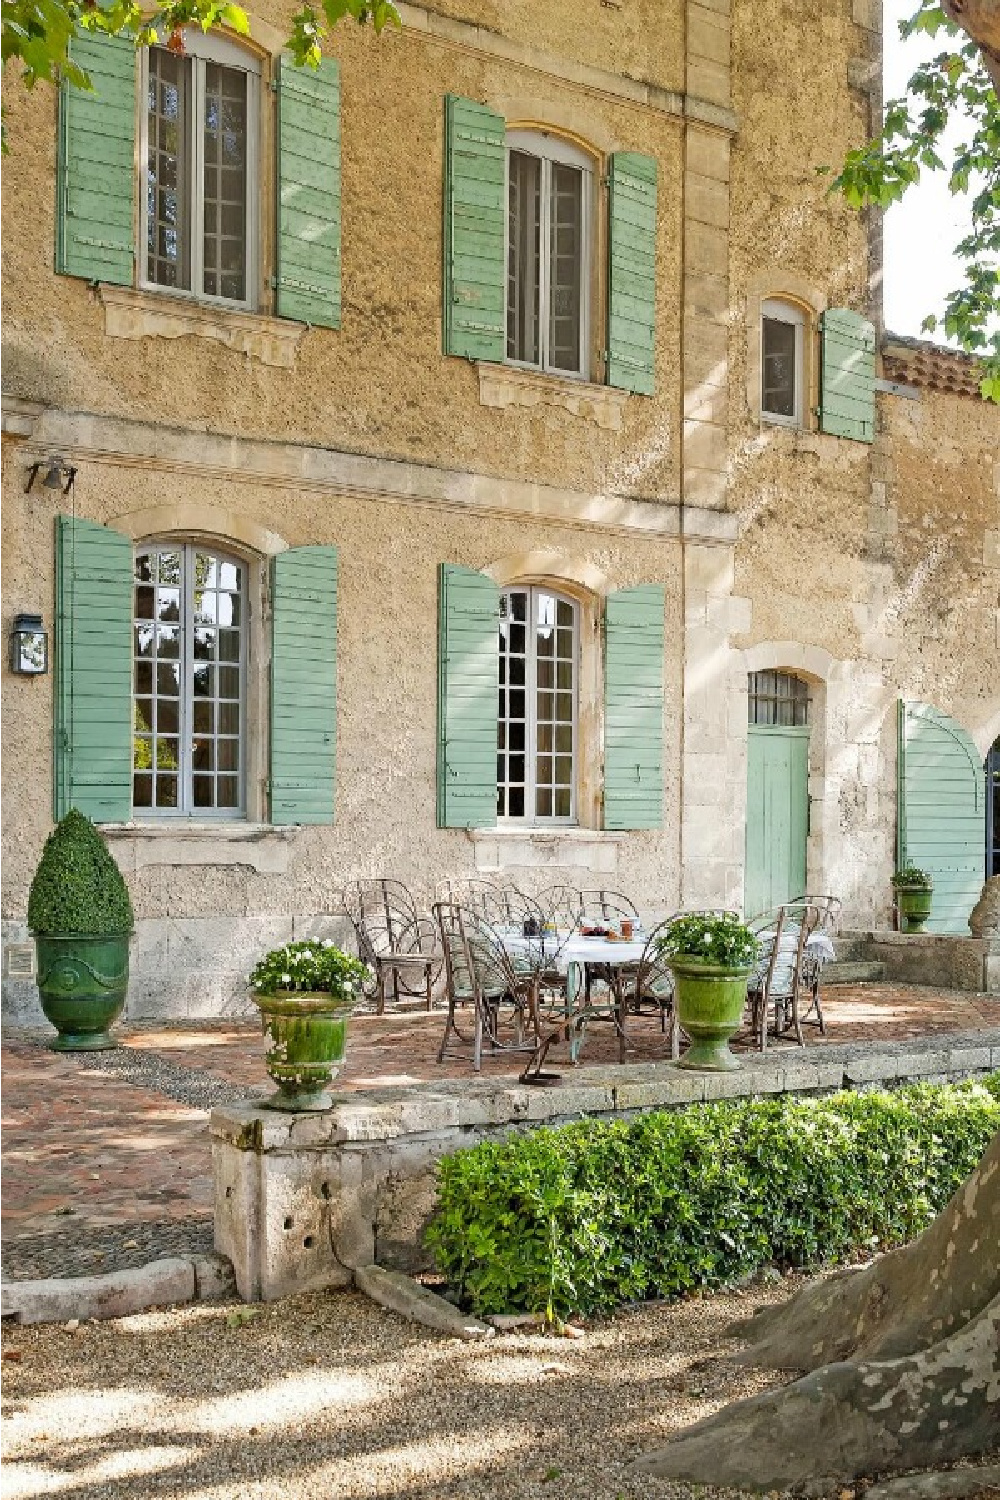 Rustic and elegant: Provençal home, European farmhouse. Come be inspired by interior design photos with French Green Paint Colors and Serene French Blue-Greens. #greenpaintcolors #mintgreen #interiordesign #paint